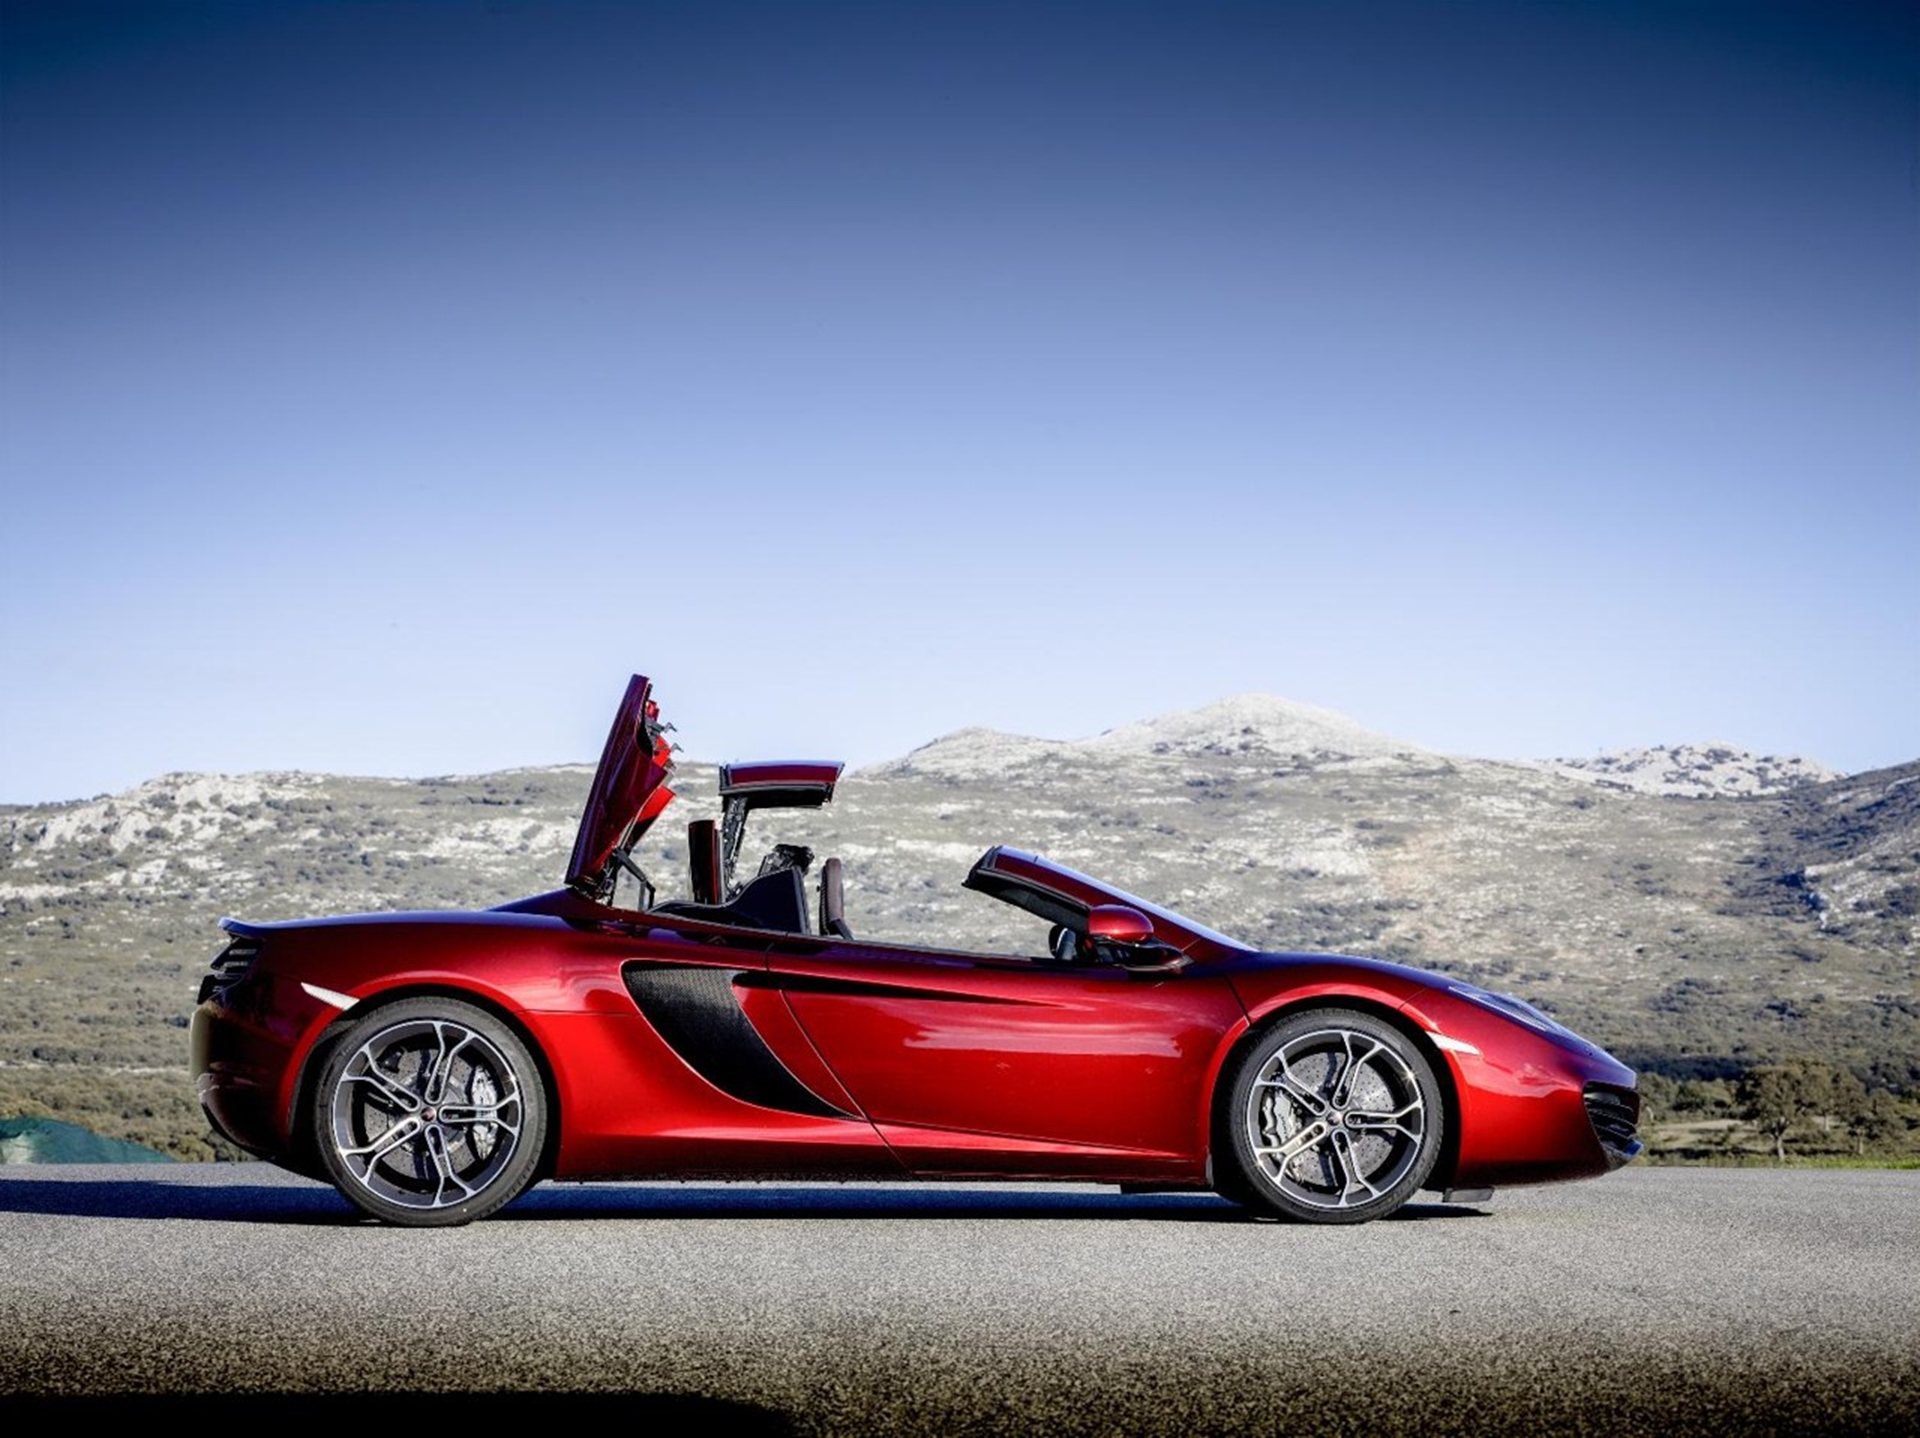 McLAREN FORMULA 1 DNA MEETS THE THRILL OF OPEN TOP DRIVING IN THE NEW 12C SPIDER